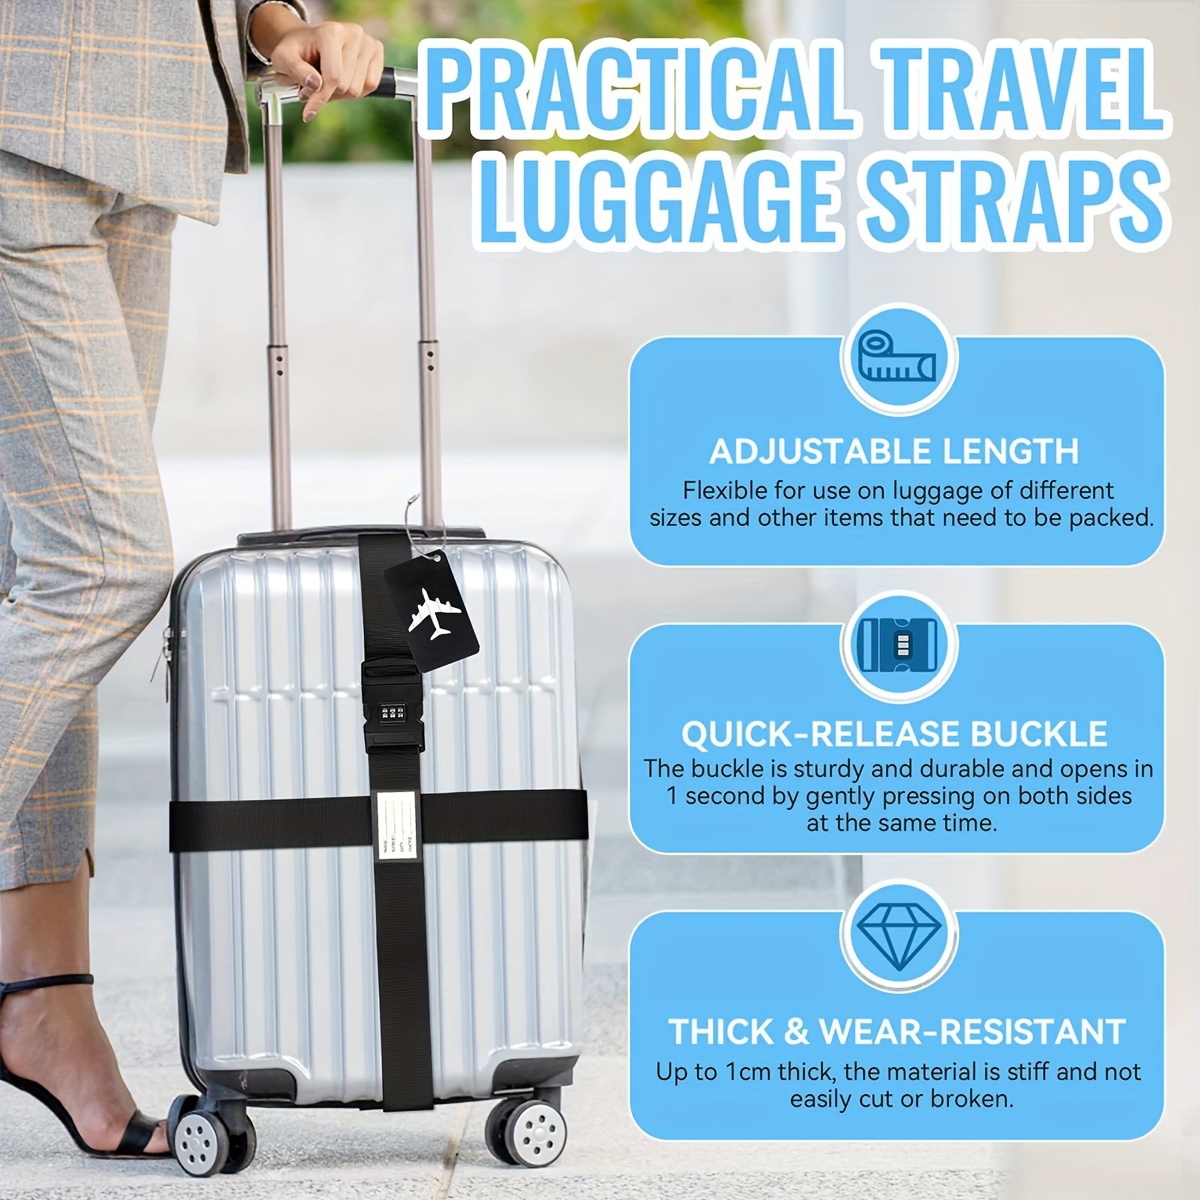 4 Pack Luggage Straps for Suitcases Adjustable Travel Luggage Strap  Suitcase Belt with Quick Release Buckle Travel Bag Accessories for Business